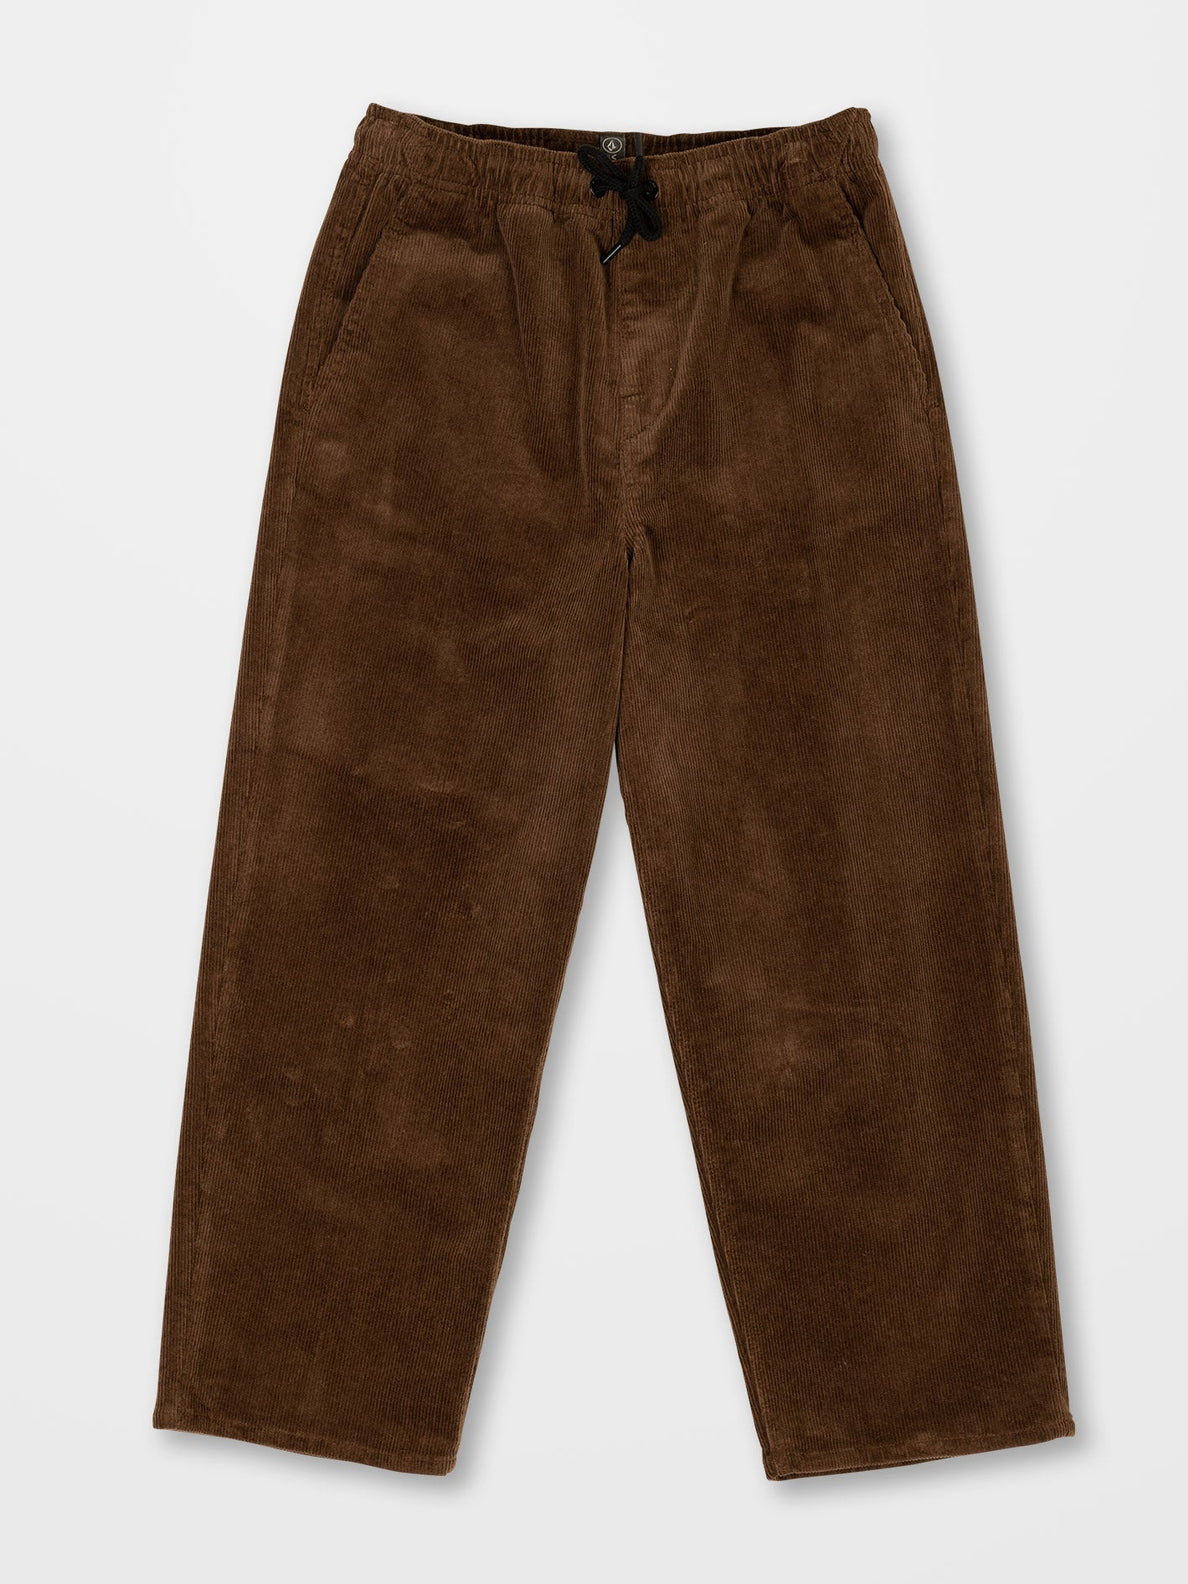 Outer Spaced Trousers - BURRO BROWN - (KIDS) (C1232232_BRR) [B]